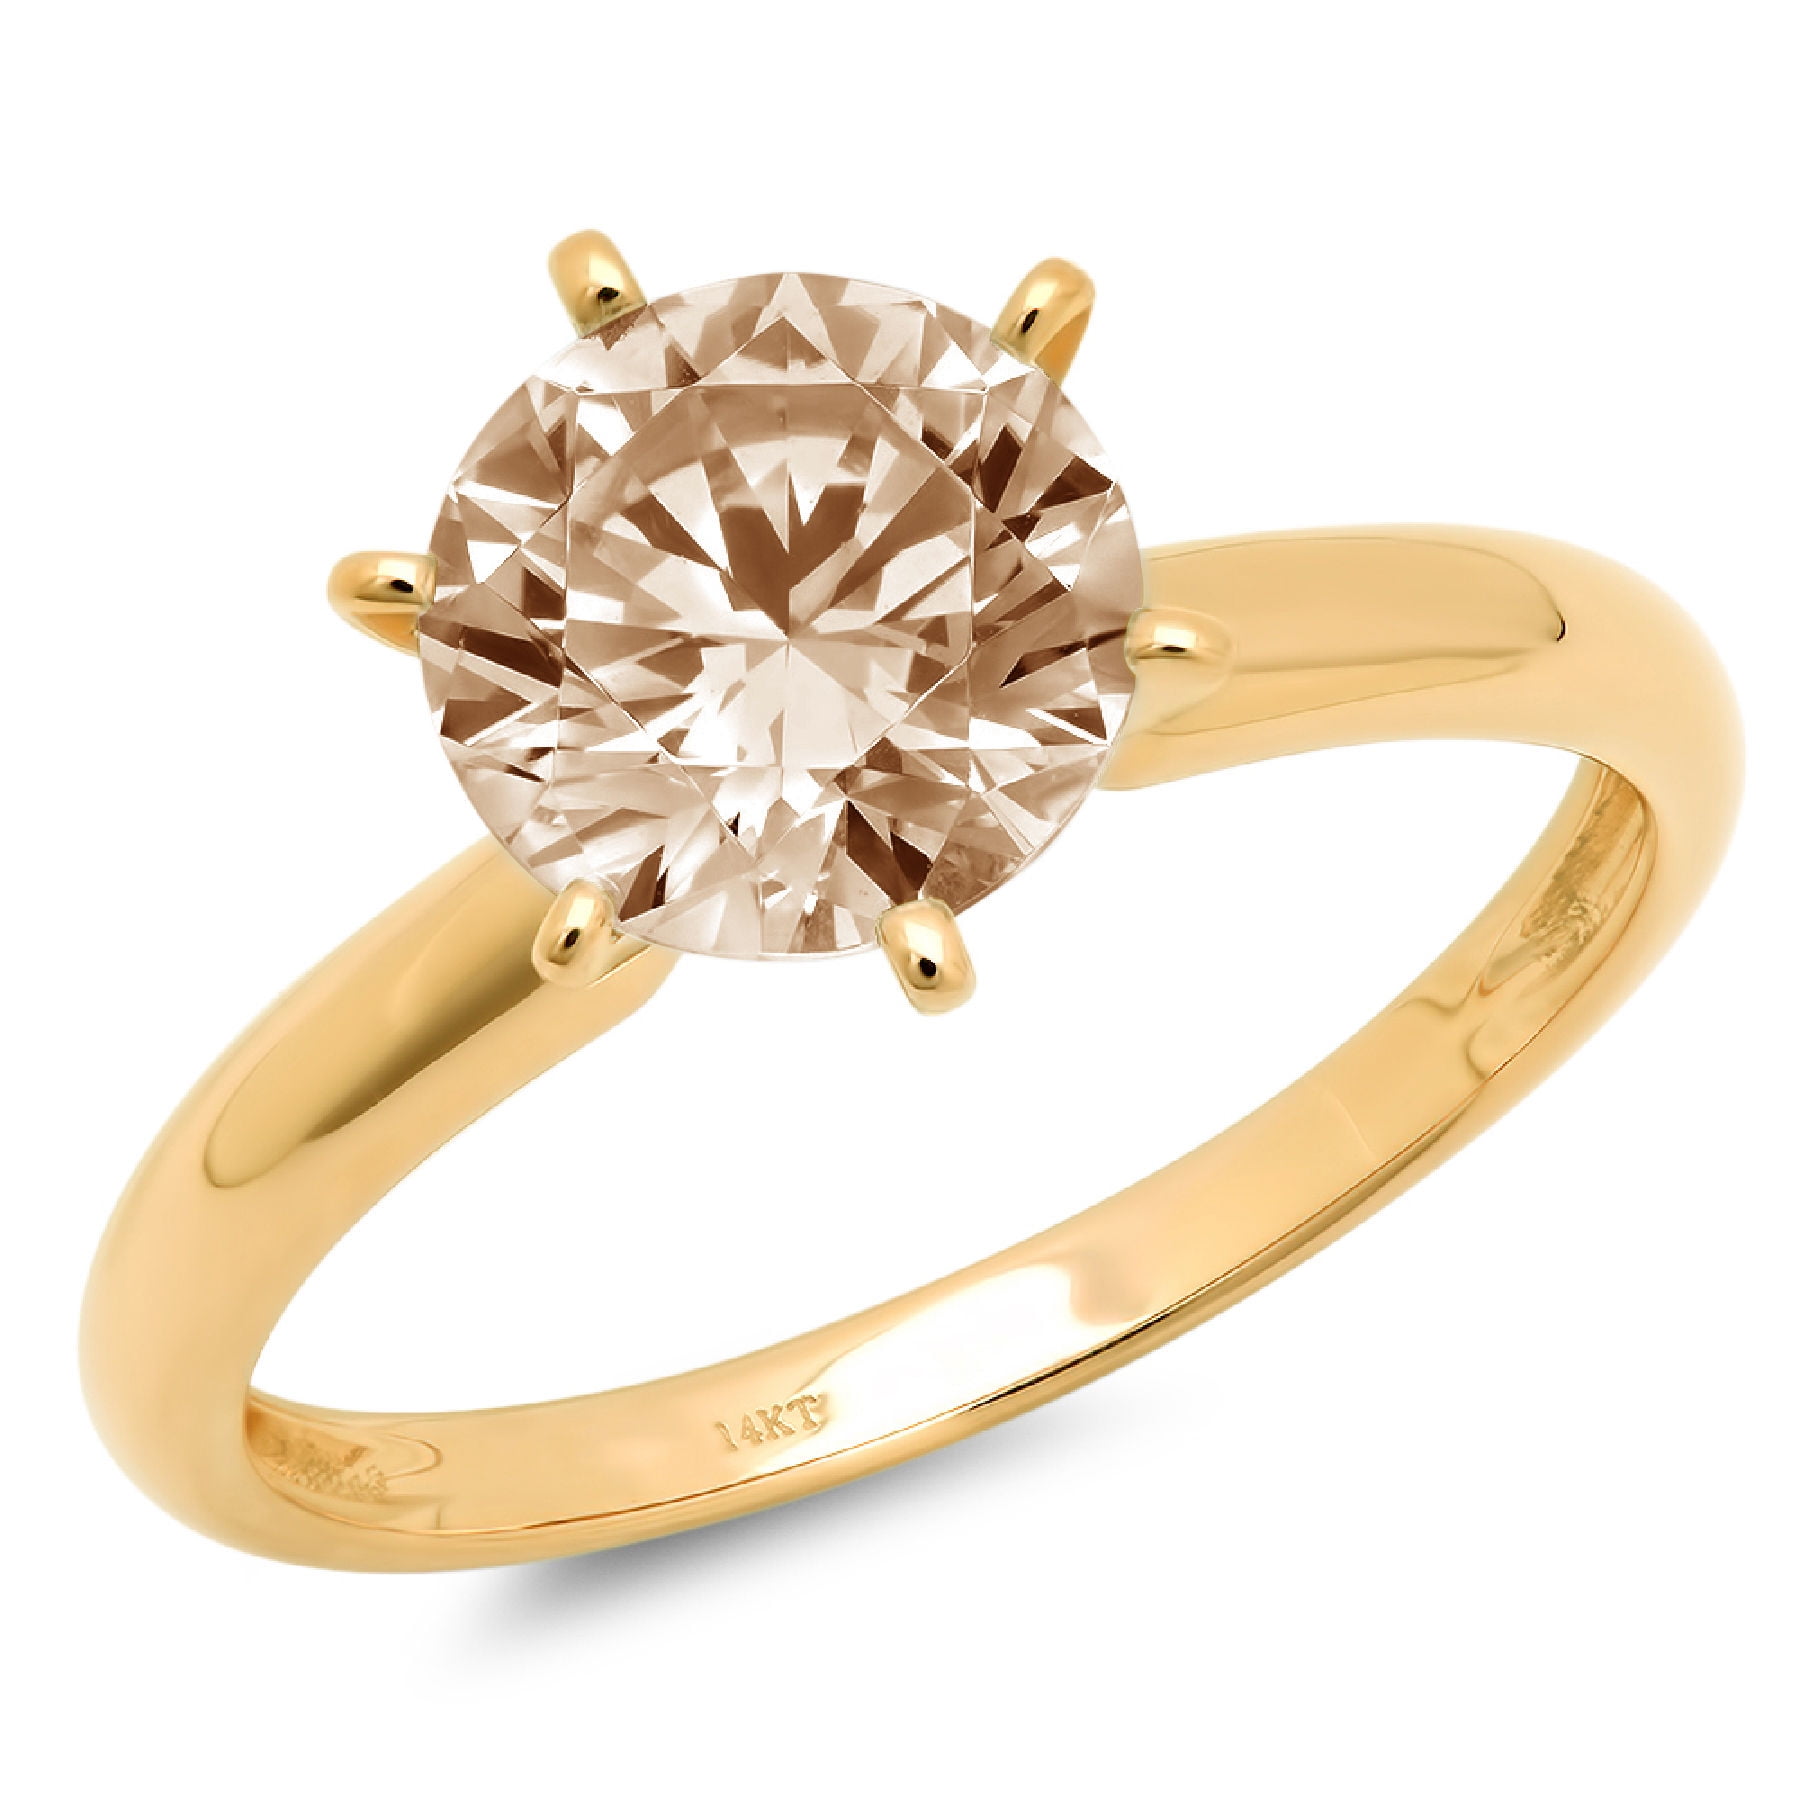 Details about   Round D/VVS1 Solitaire Wedding Ring 14K Yellow Gold Over 925 Sterling Silver 